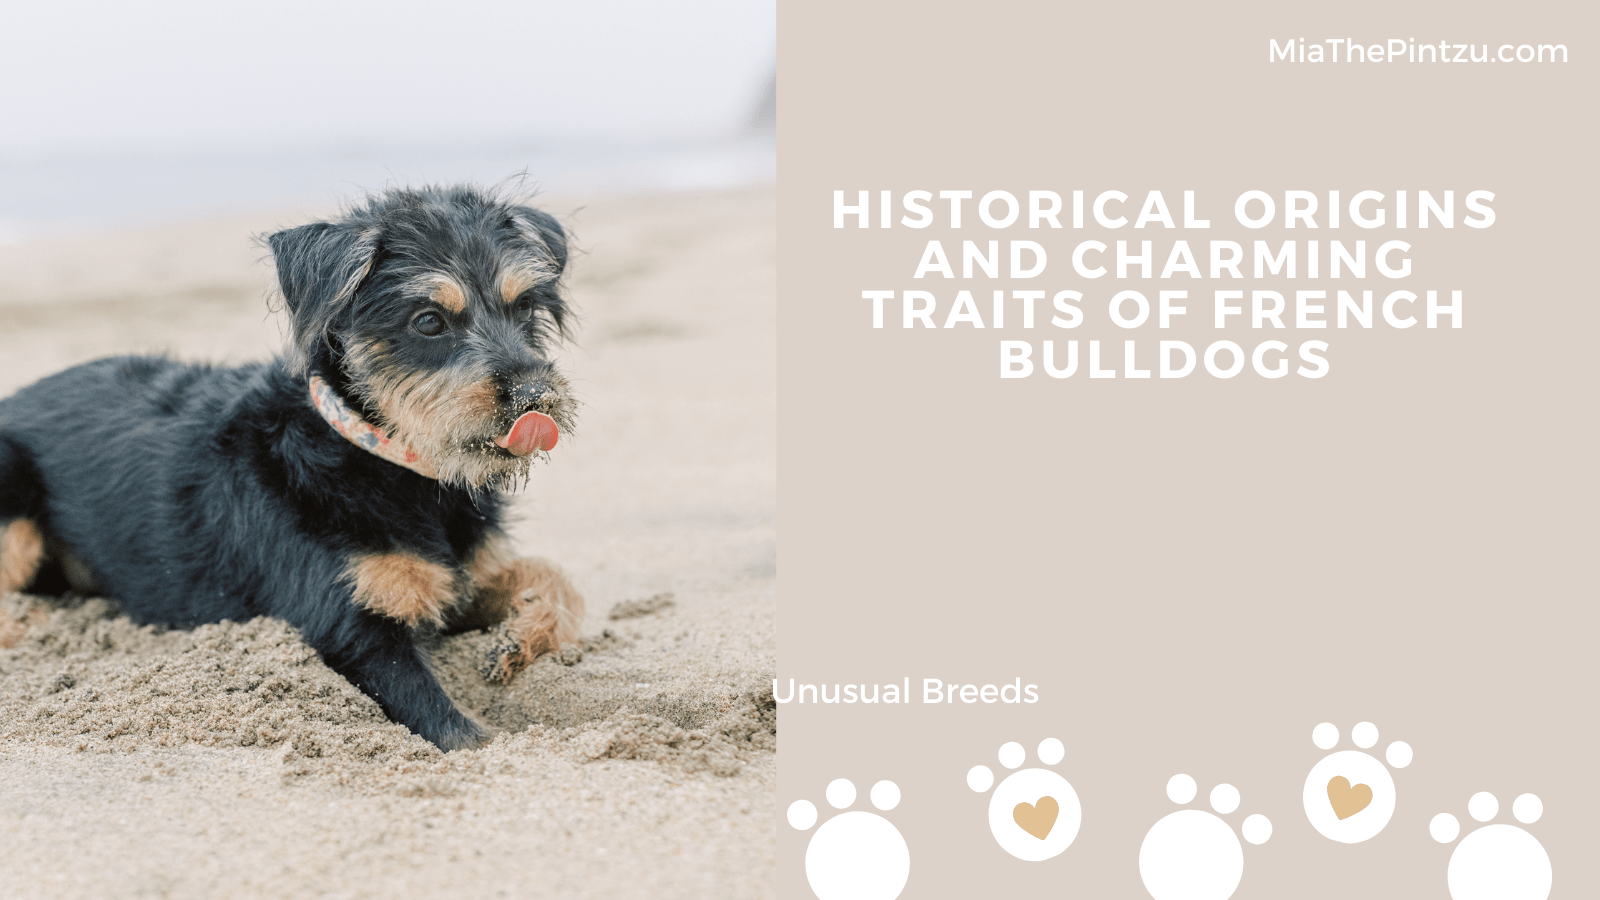 Historical Origins and Charming Traits of French Bulldogs